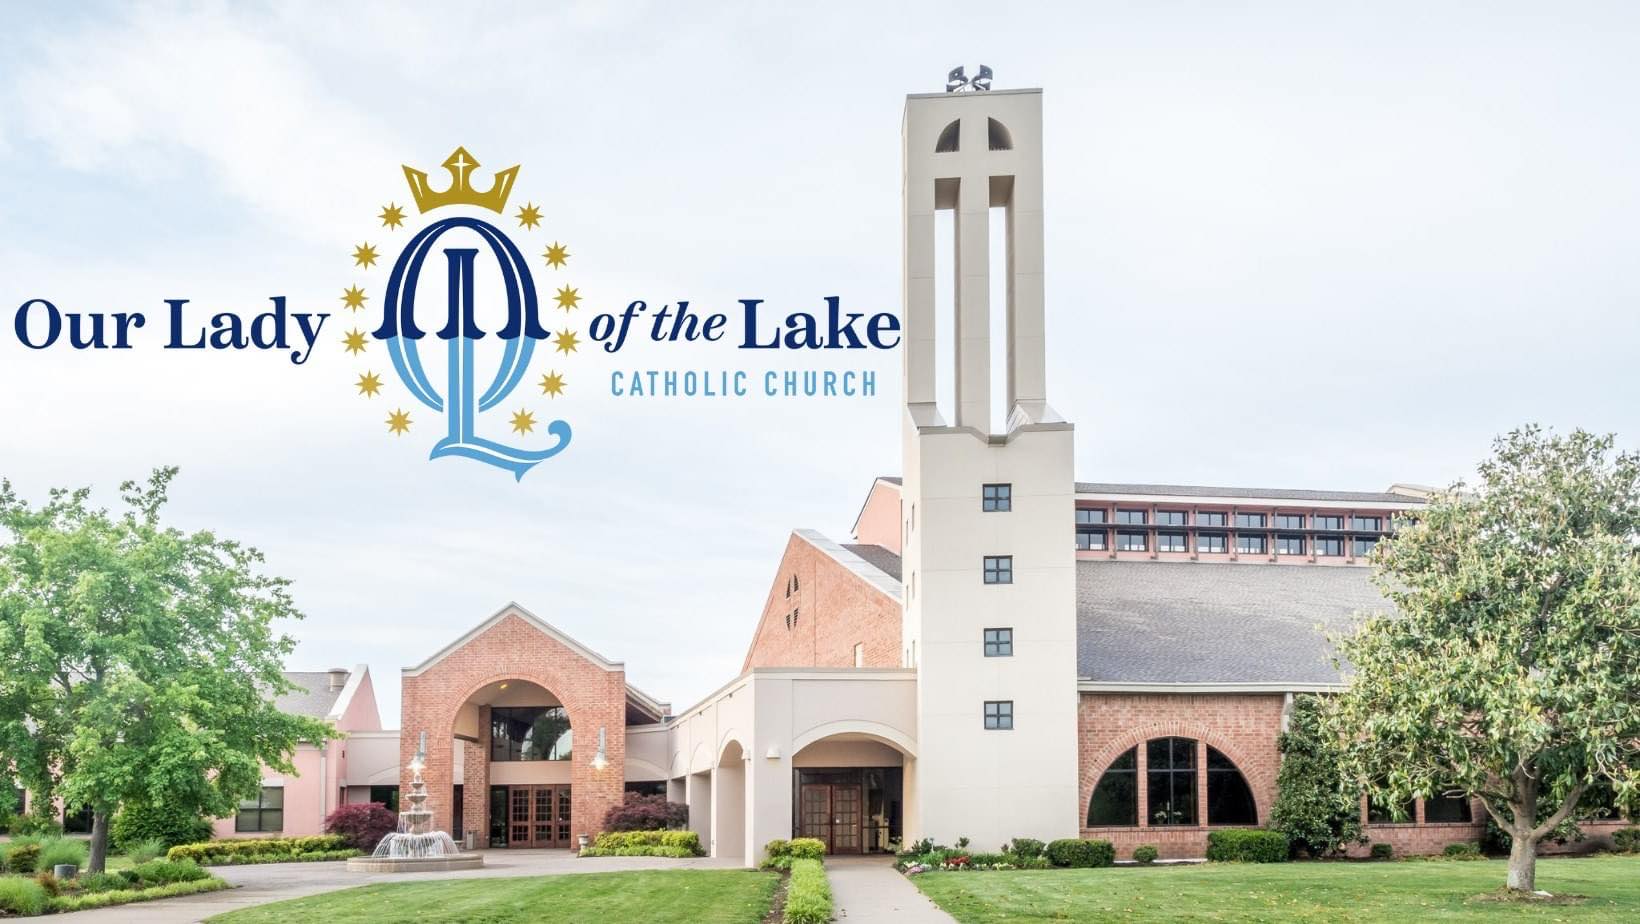 NASHVILLE MARIAN CONFERENCE, Our Lady of the Lake Catholic Church